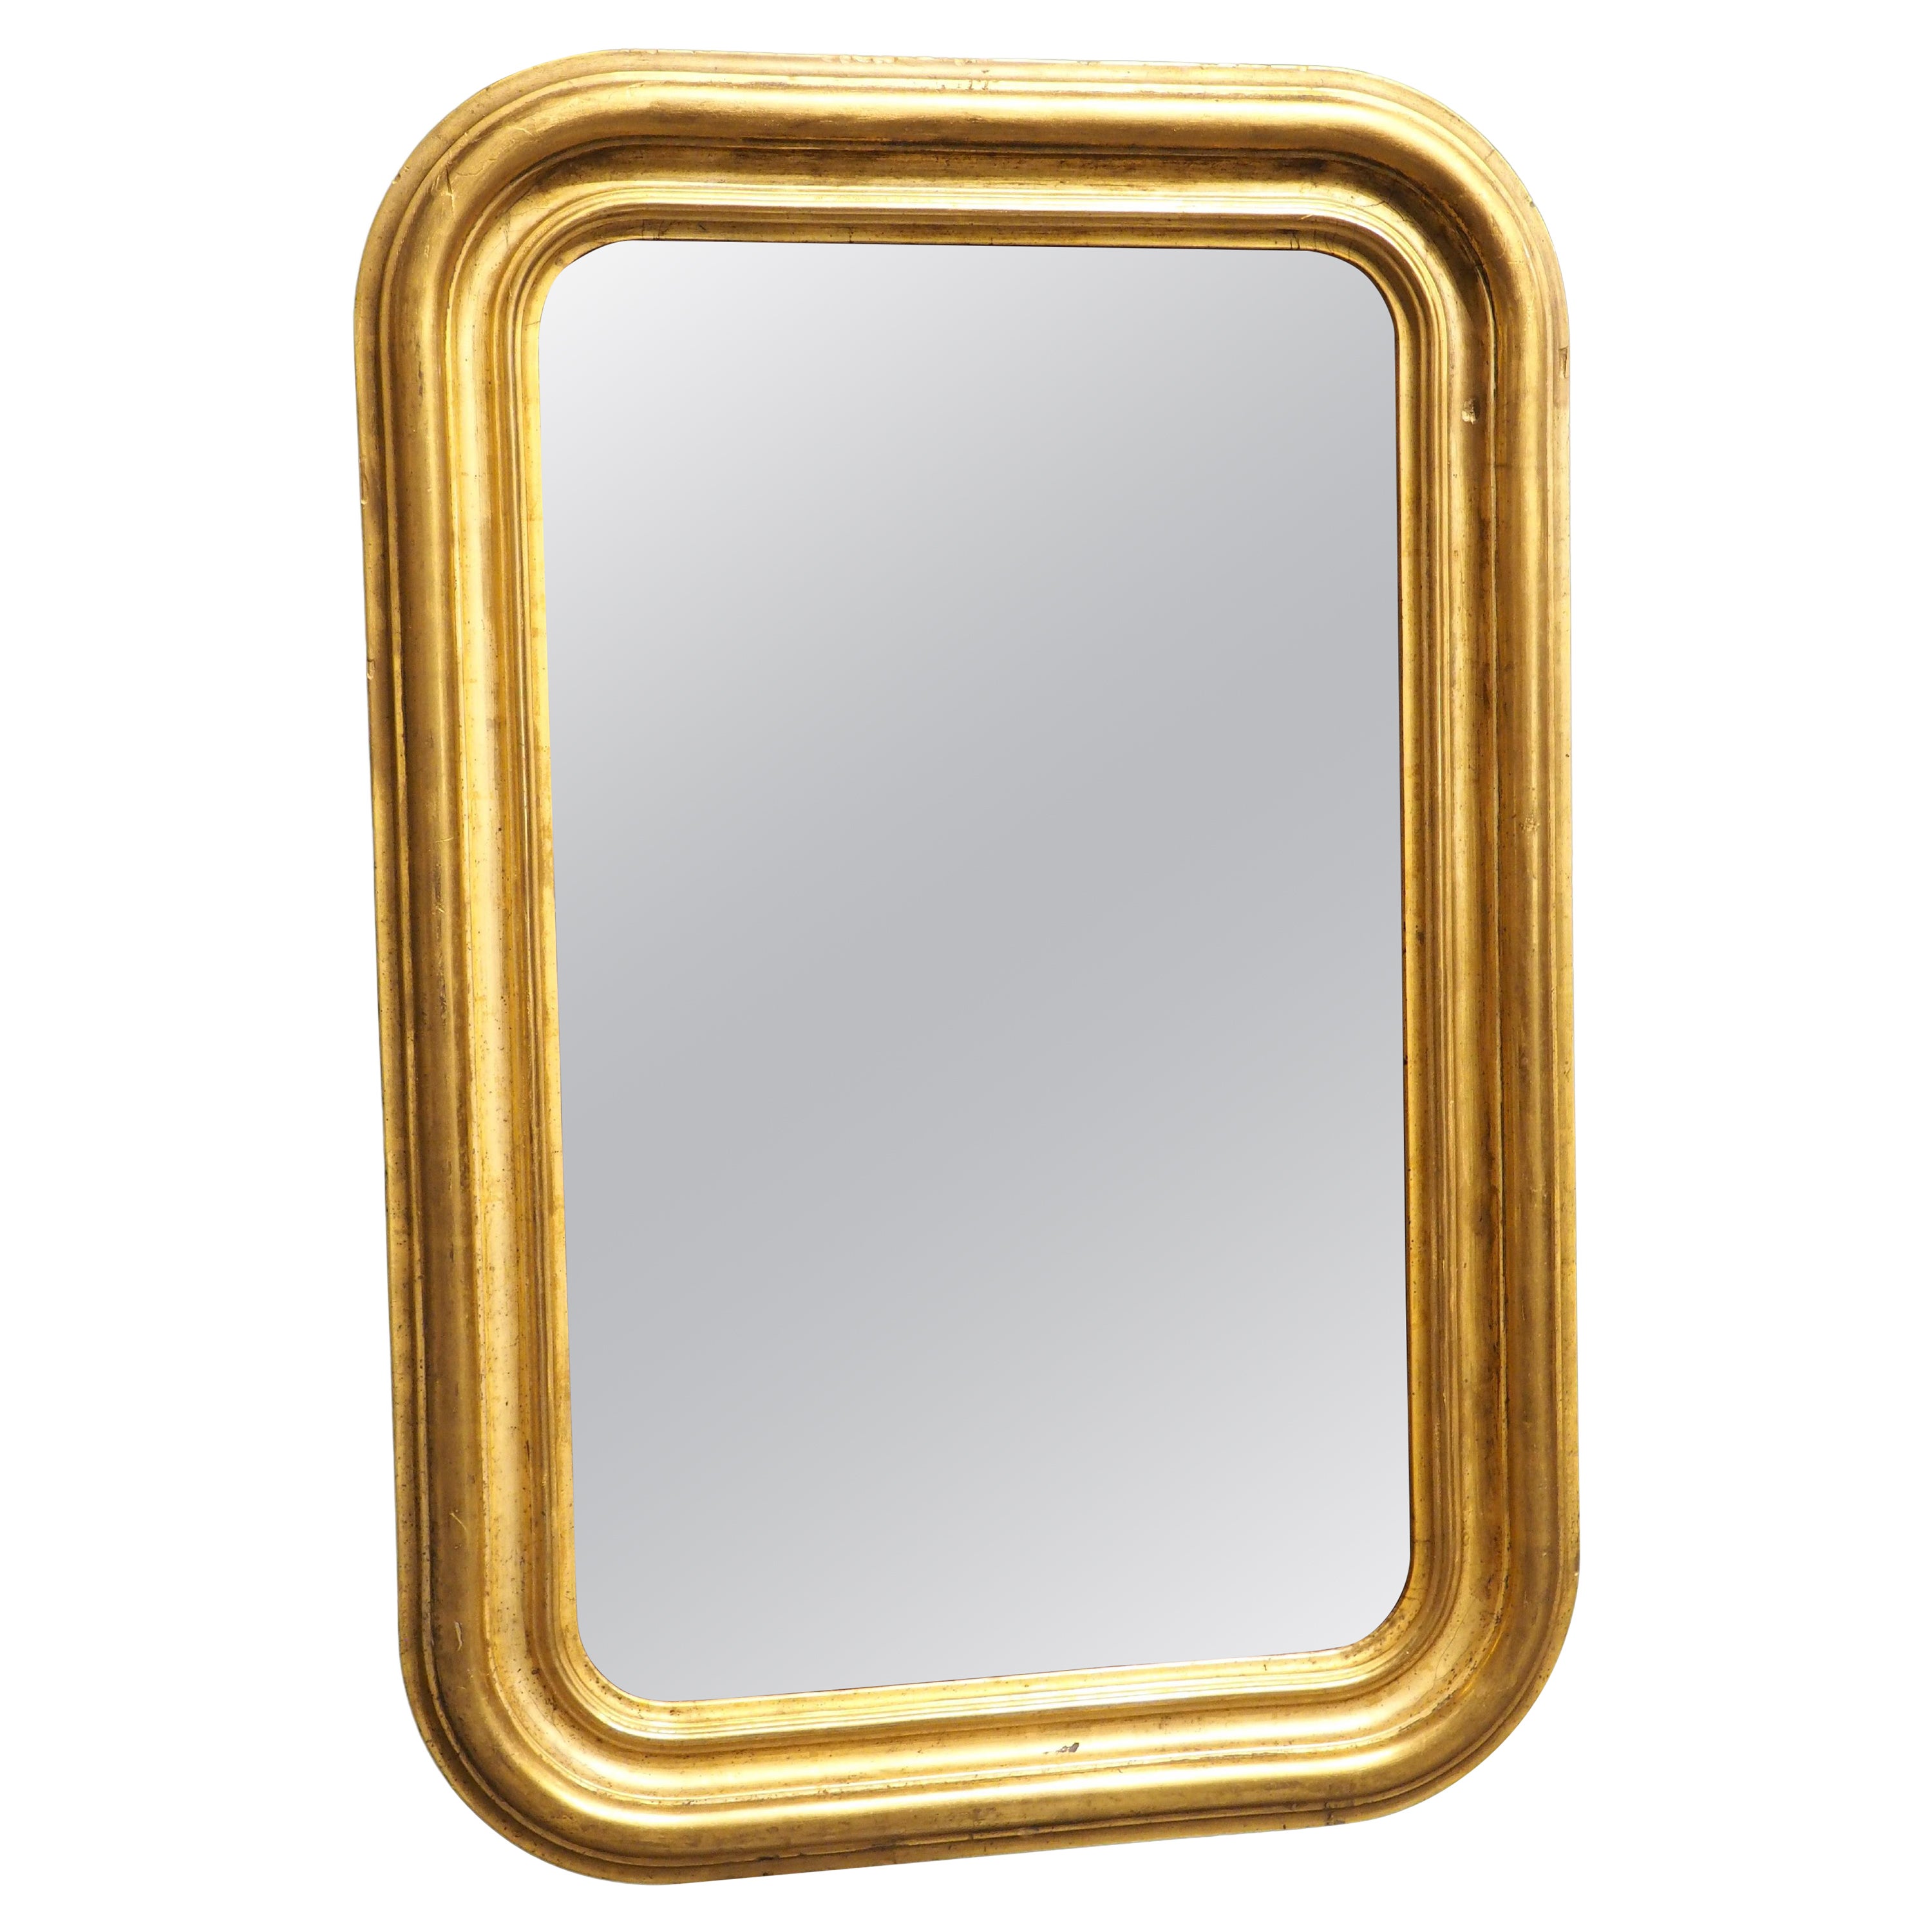 Circa 1850 Antique Giltwood Louis Philippe Mirror from France For Sale